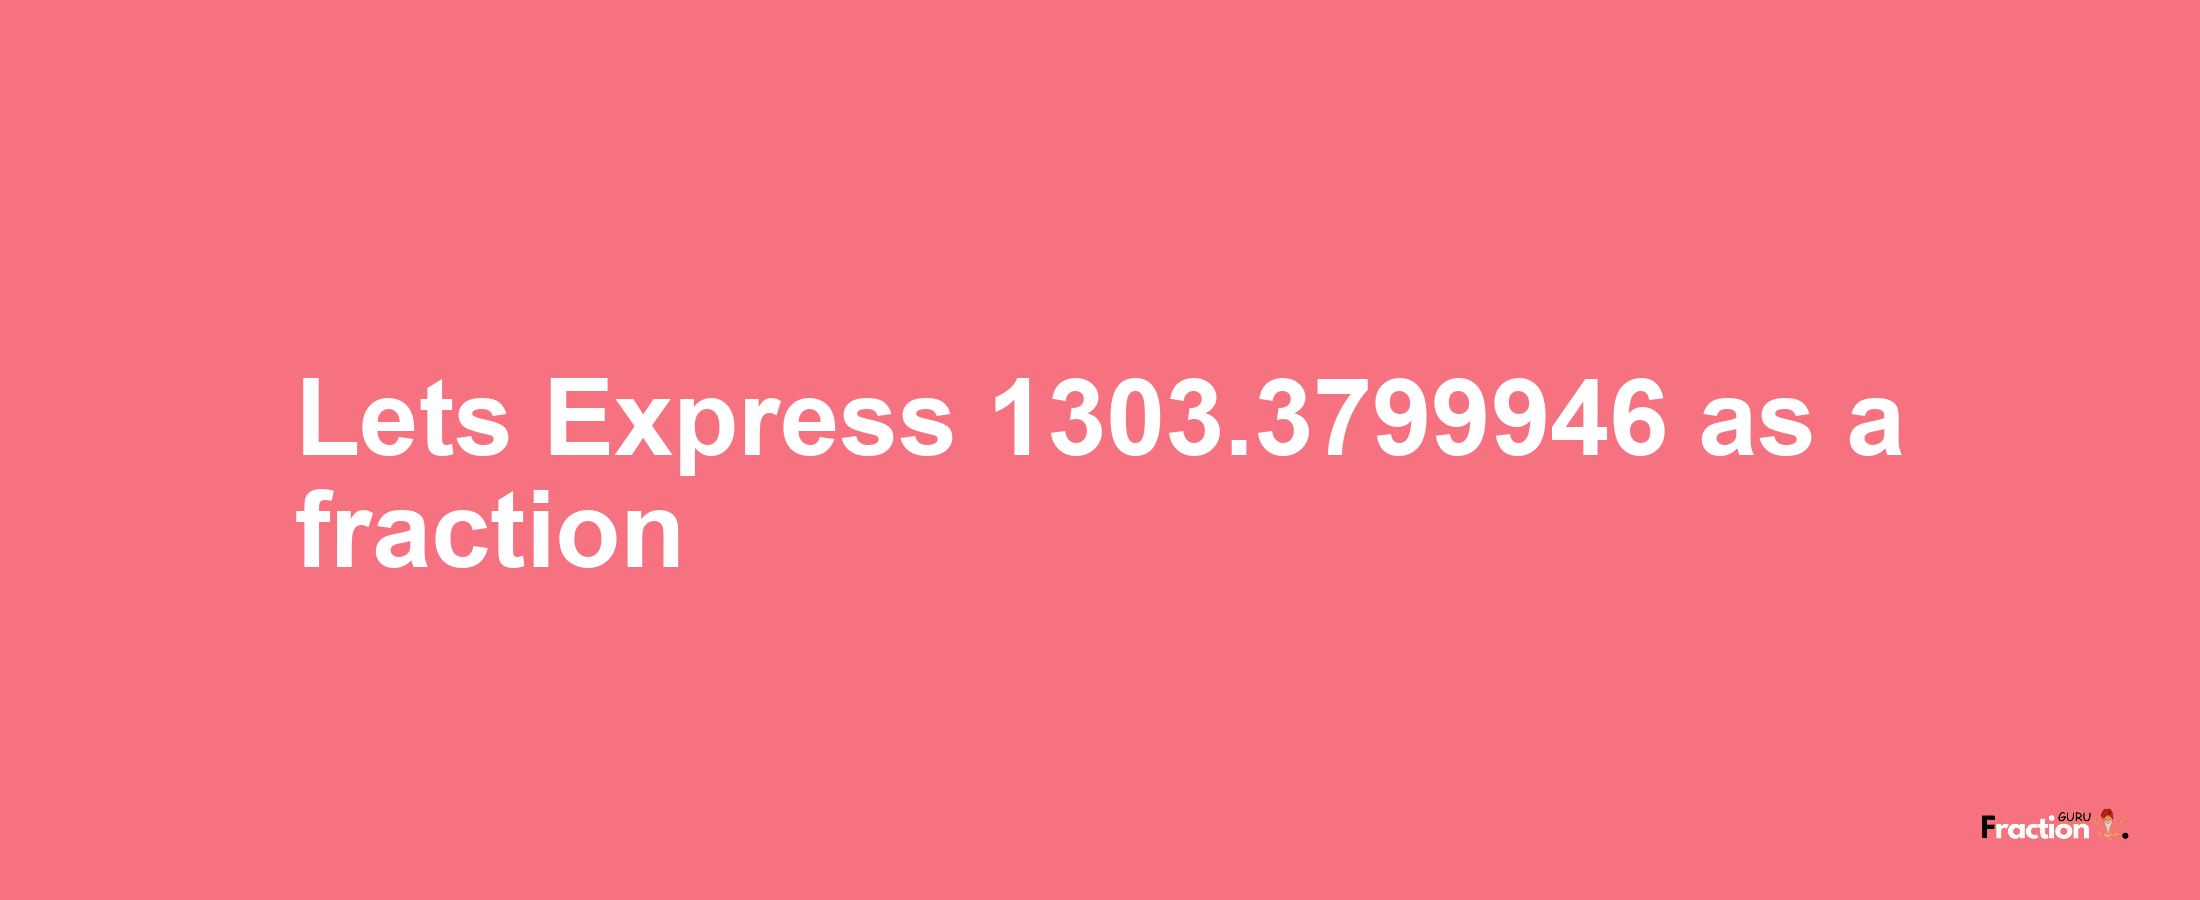 Lets Express 1303.3799946 as afraction